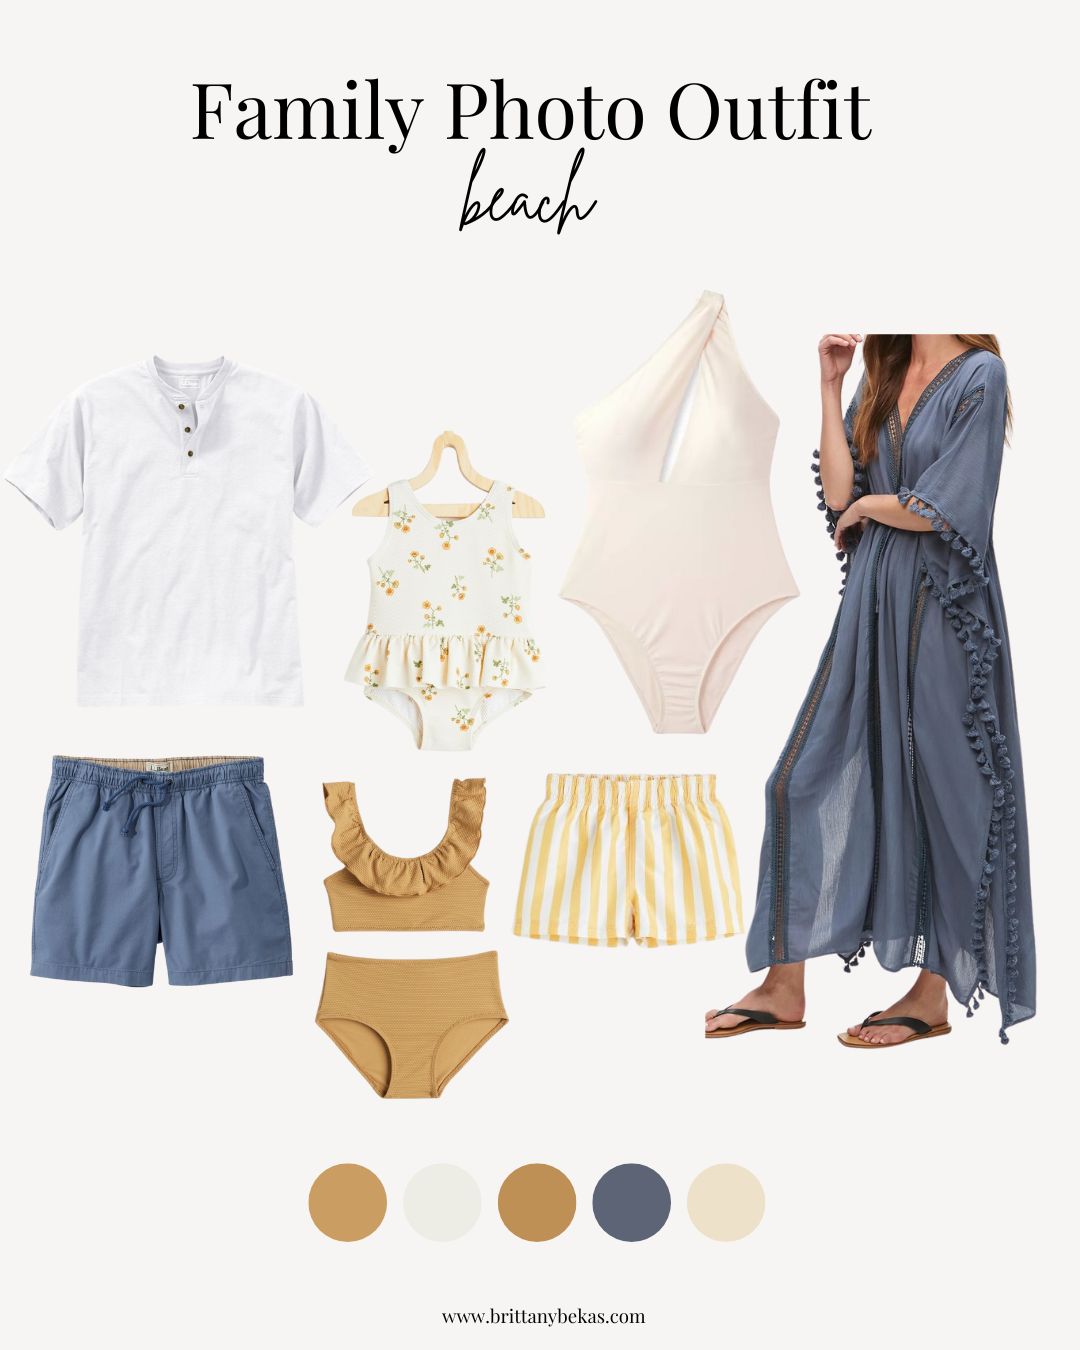 What to wear for beach family photos